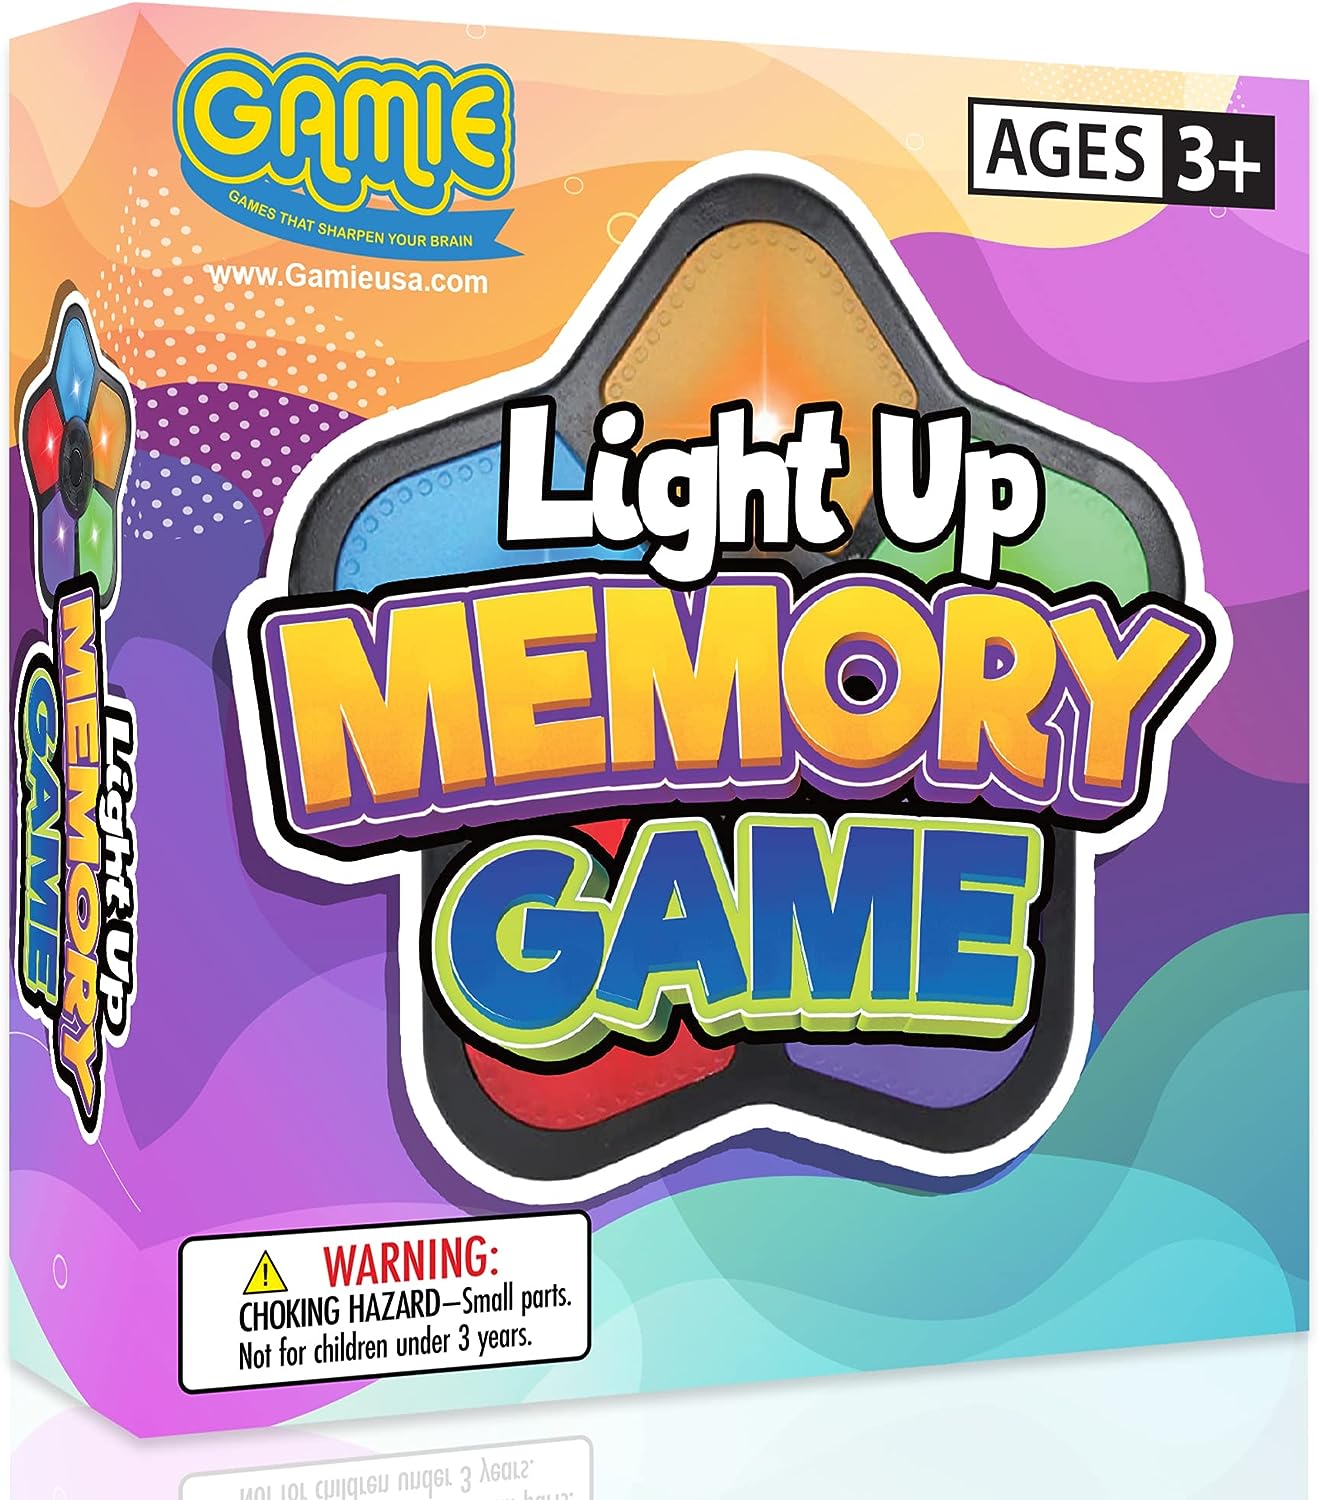 Gamie Electronic Memory Game with Lights and Sounds, Handheld Memory Game for Kids, Mind-Sharpening Brain Games for Kids and Adults, Educational Learning Game